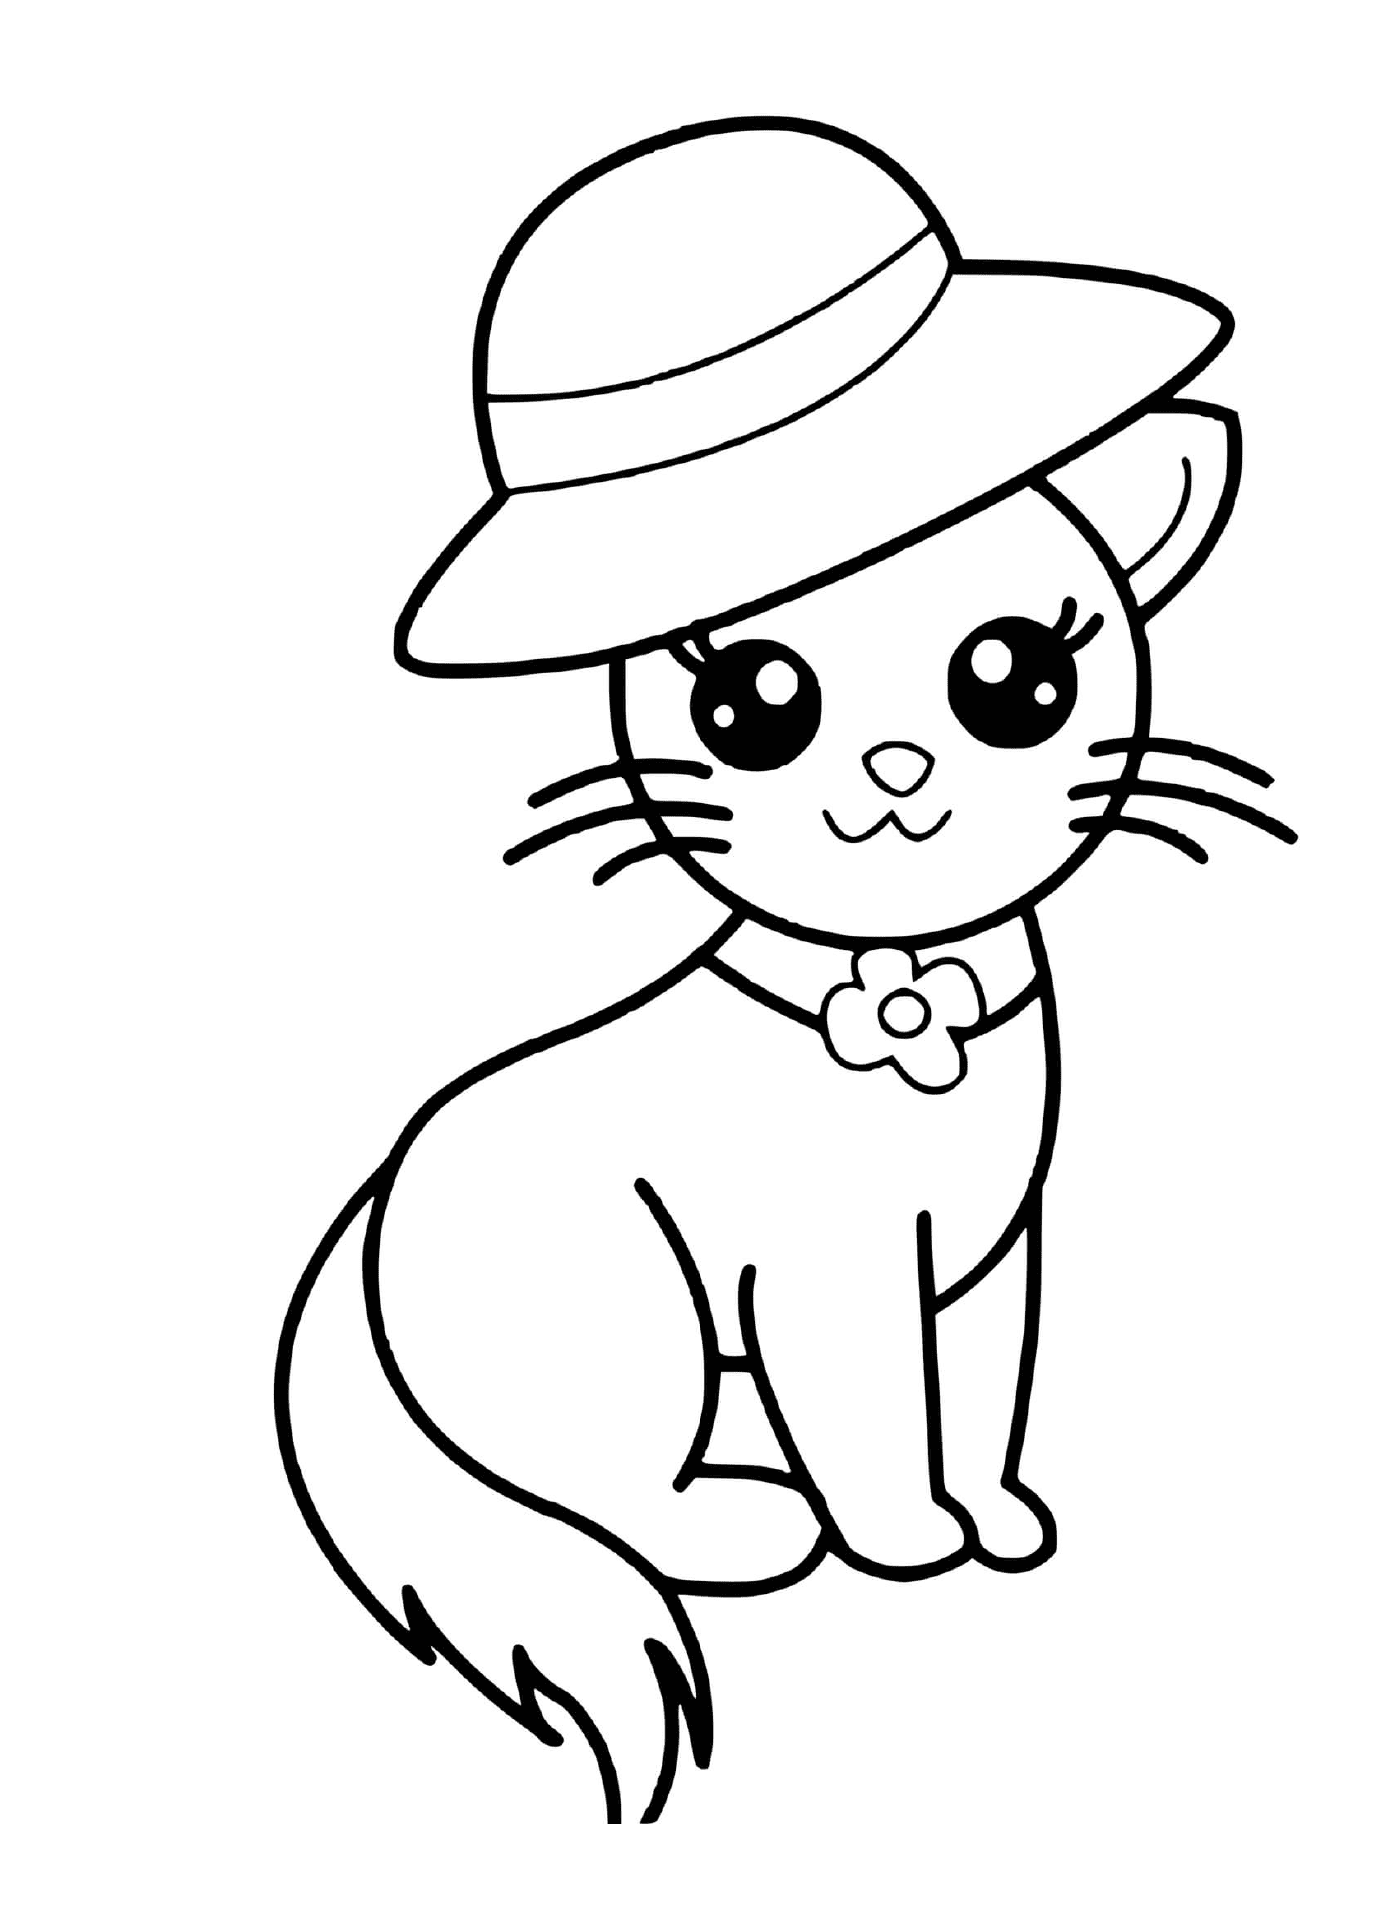  Elegant kawaii cat with a chic hat 